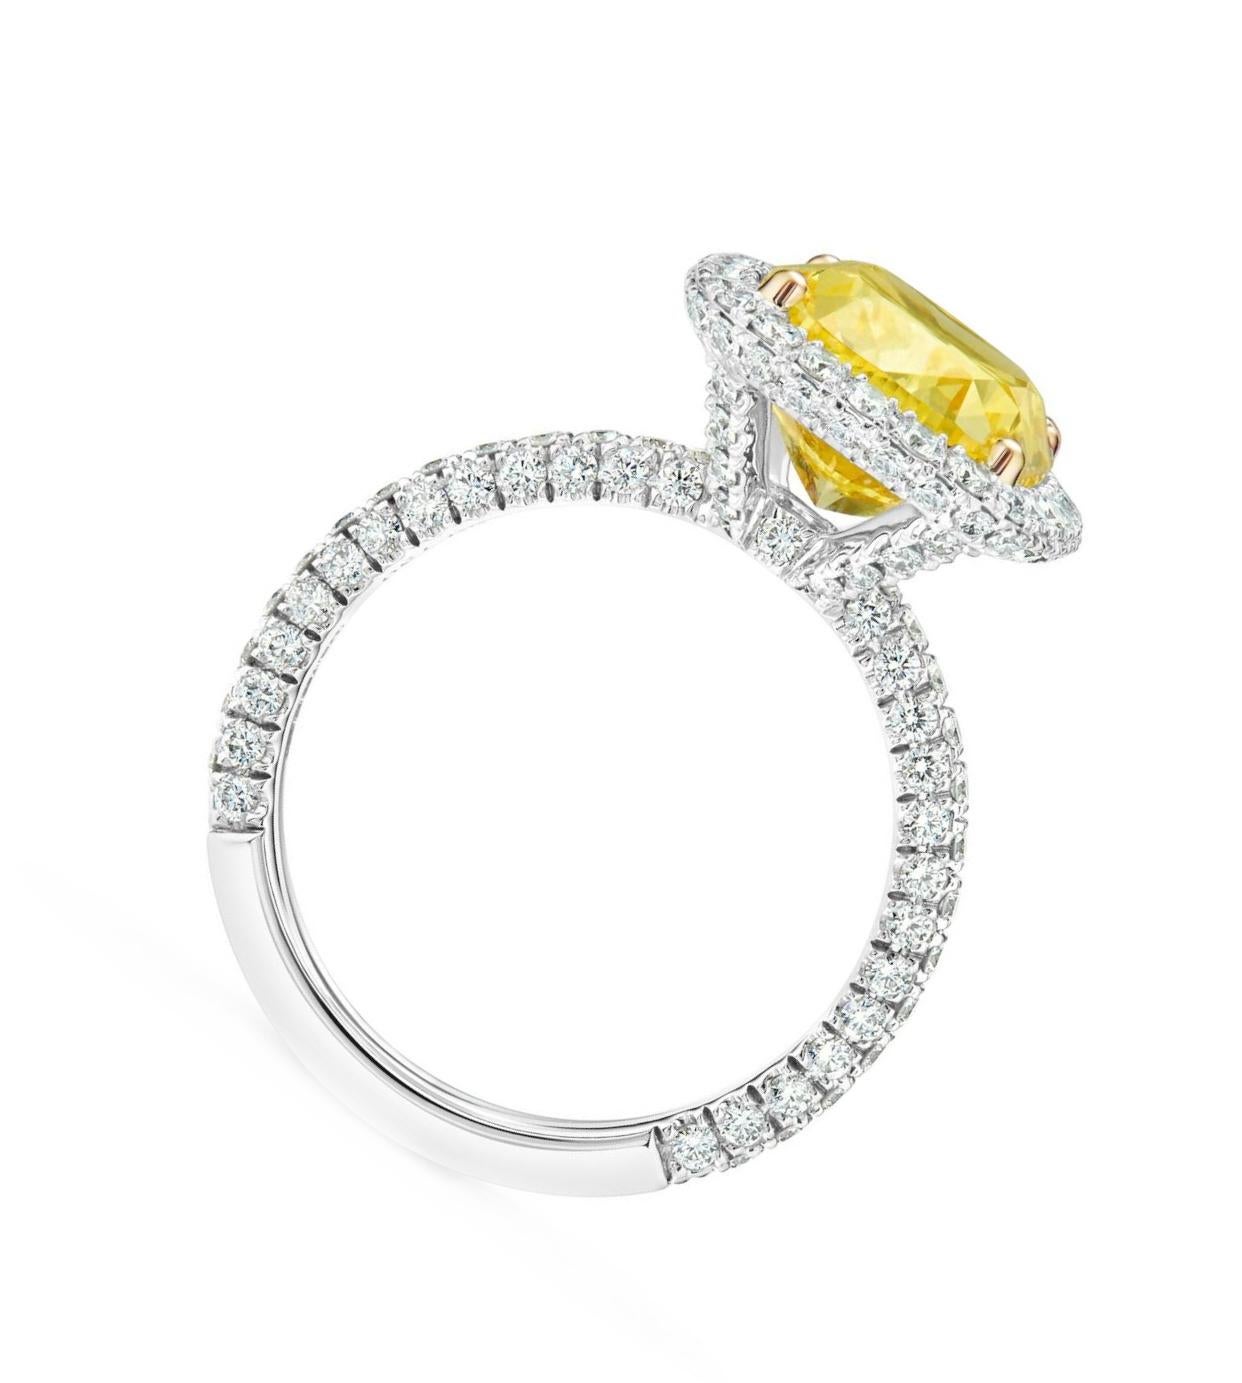 This exquisite custom-ordered ring, yet to be crafted, represents a unique and personal expression of elegance and exclusivity. At its heart lies a breathtaking 4.14 carat Fancy Yellow cushion-shaped diamond, certified by GIA for its exceptional